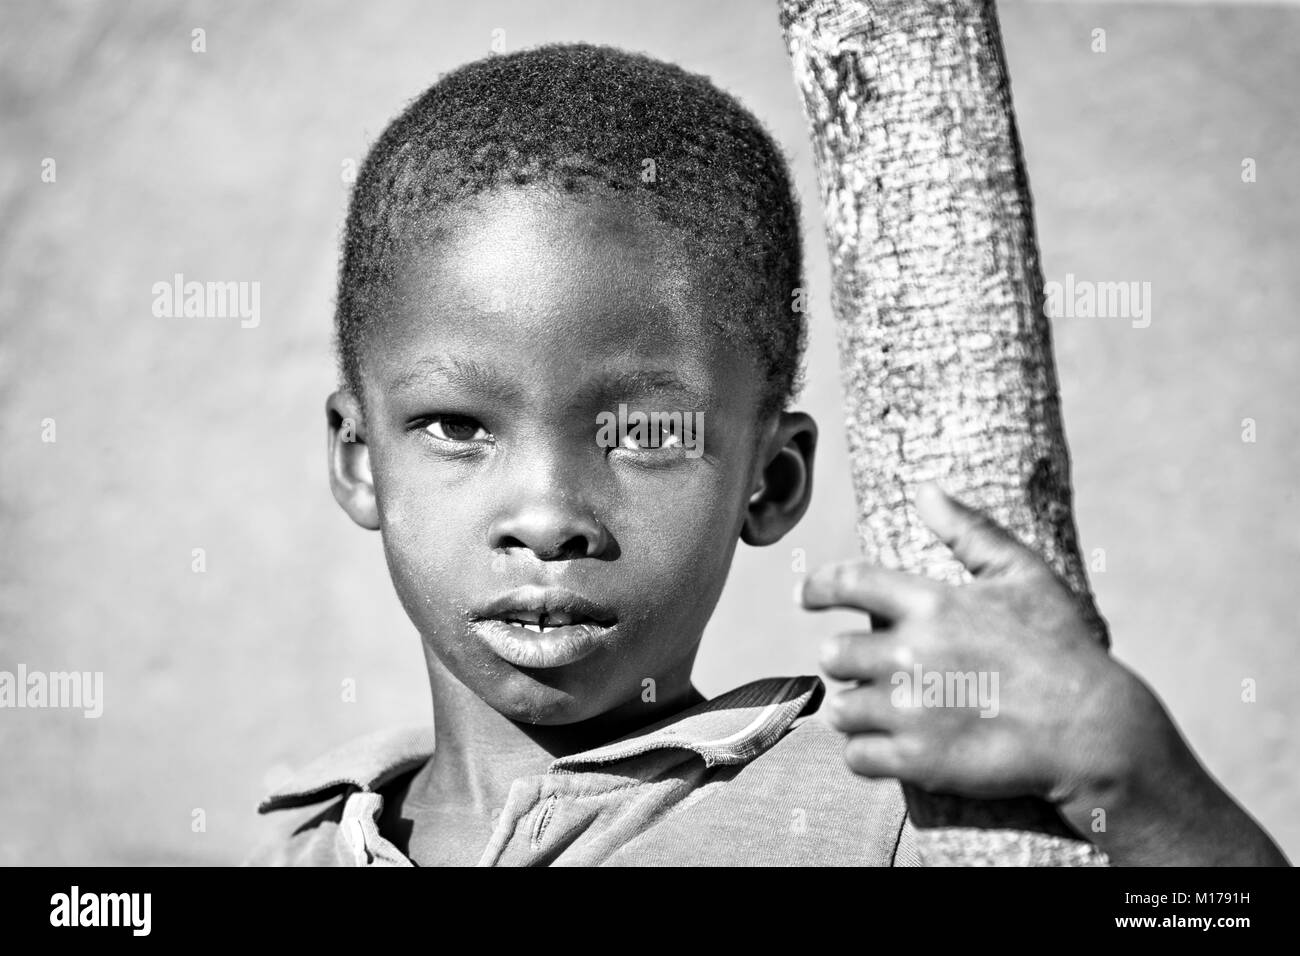 African child in the yard of a village, Botswana Stock Photo